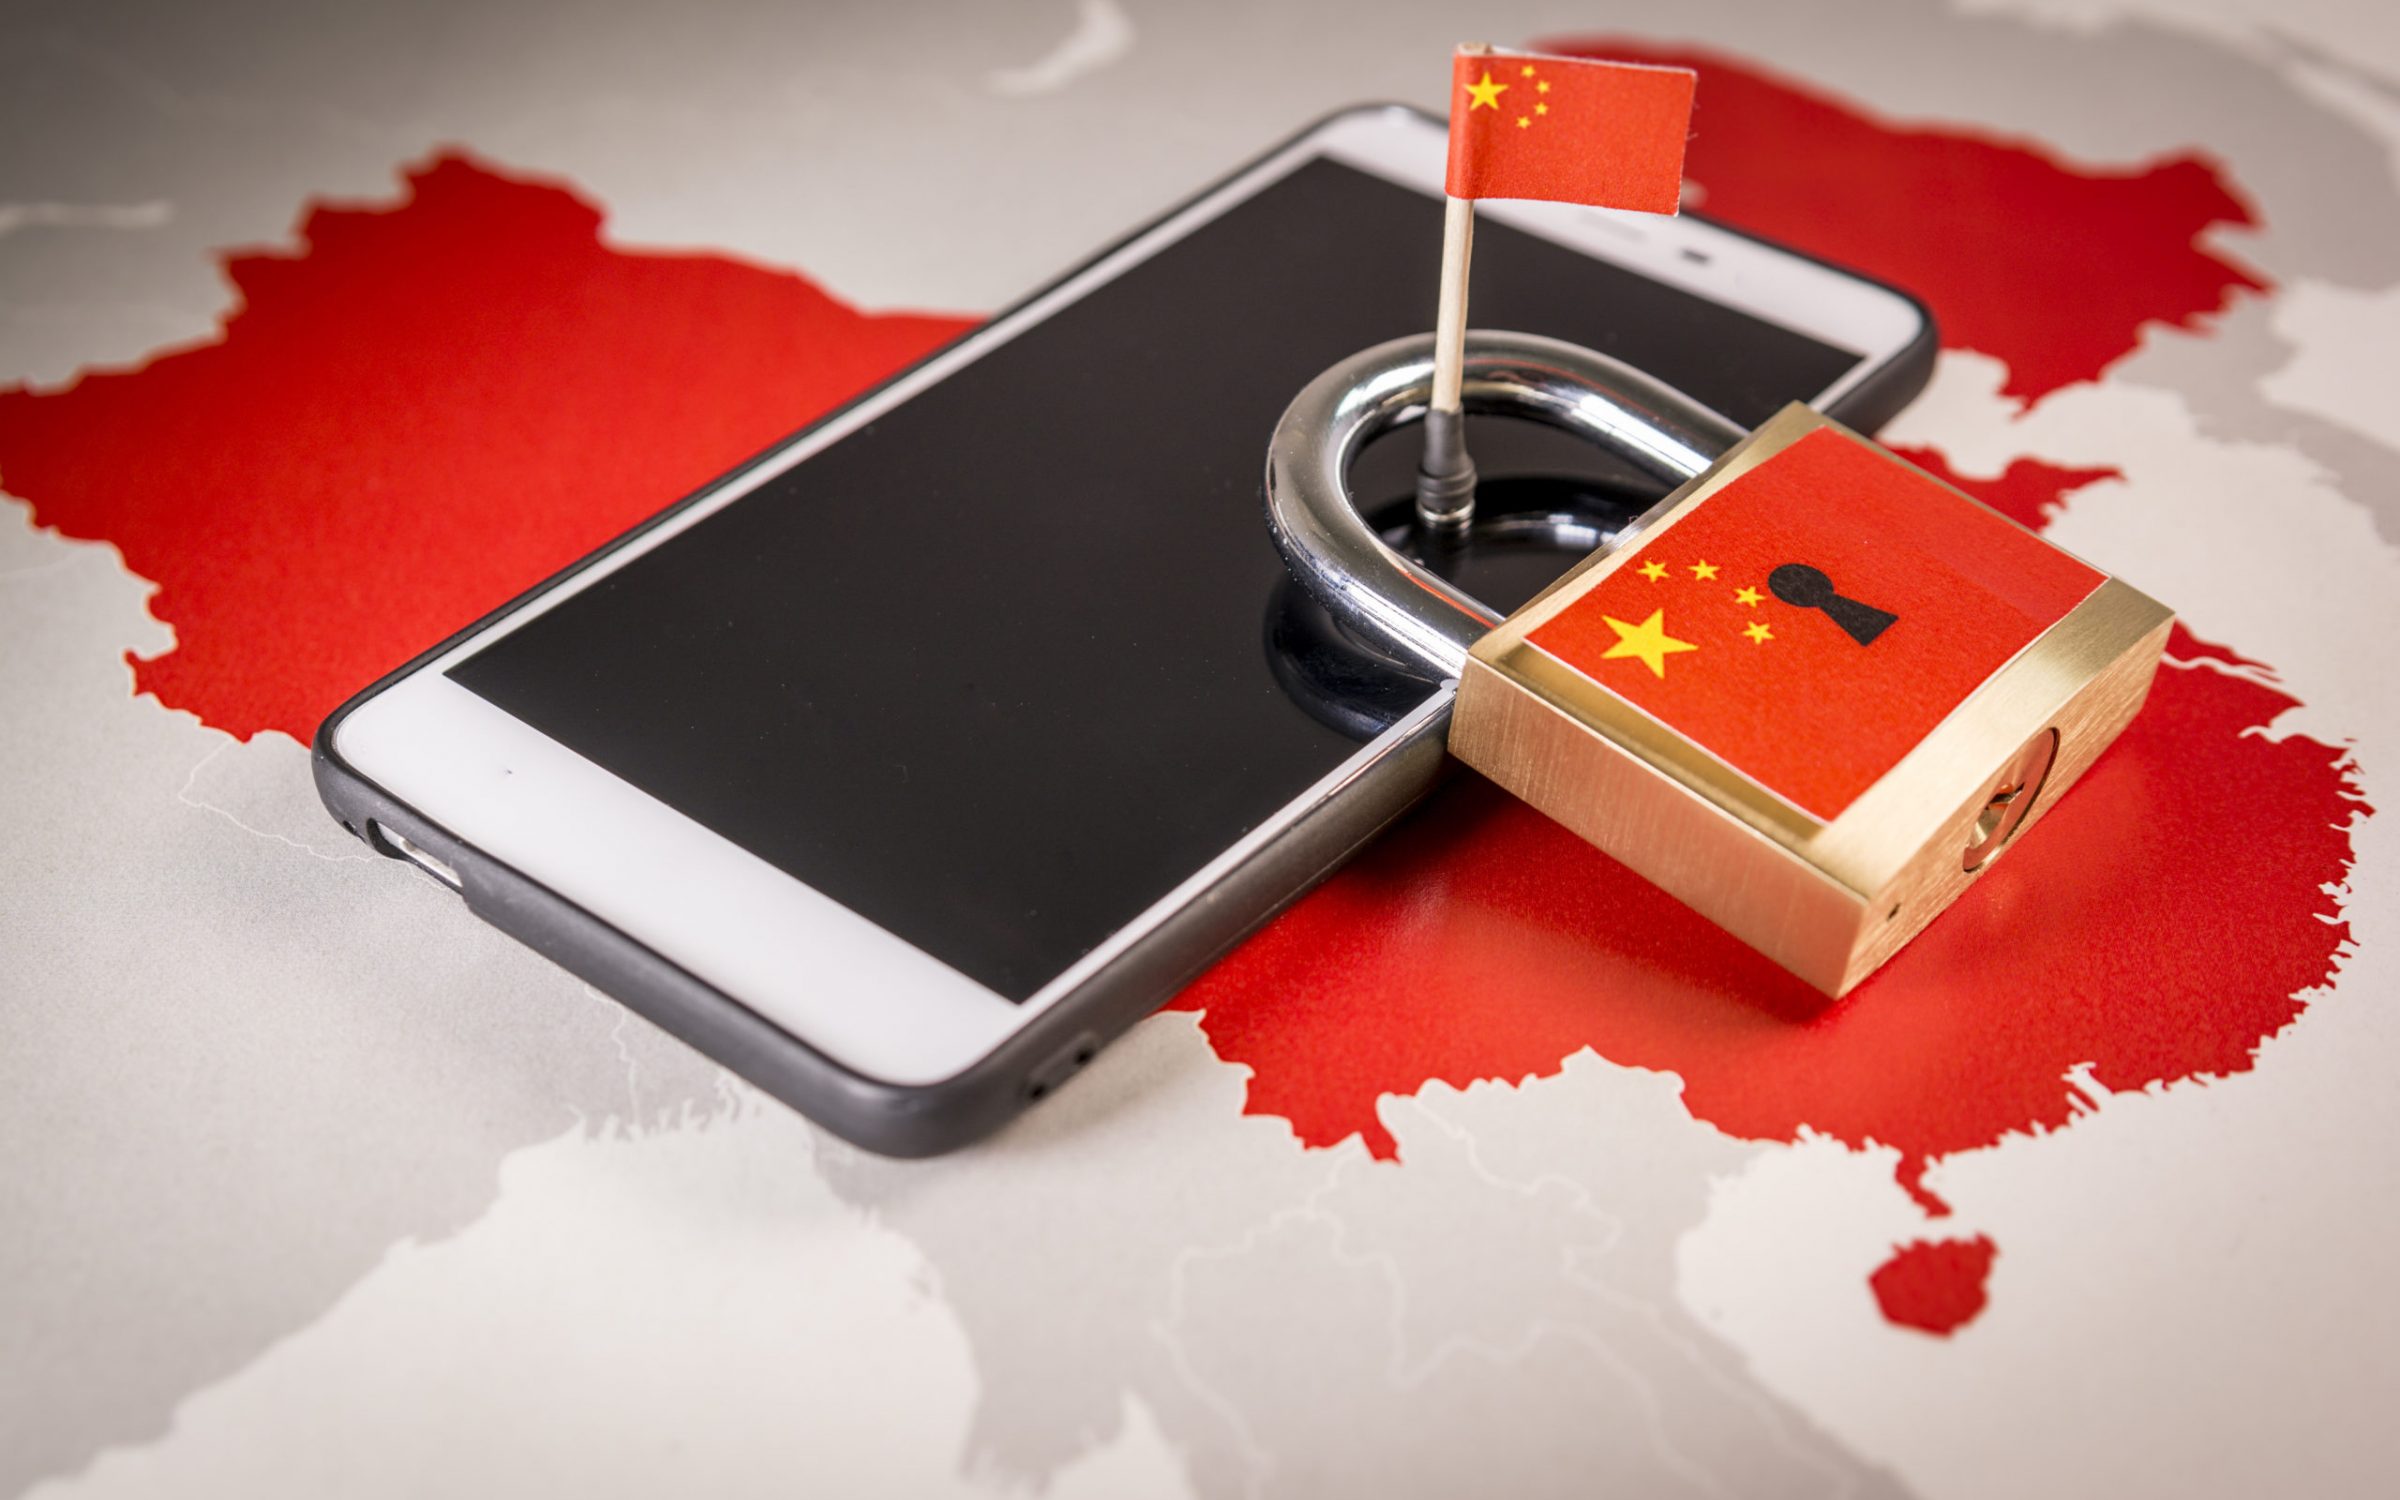 Padlock, China flag on a smartphone and China map. Great Firewall of China concept